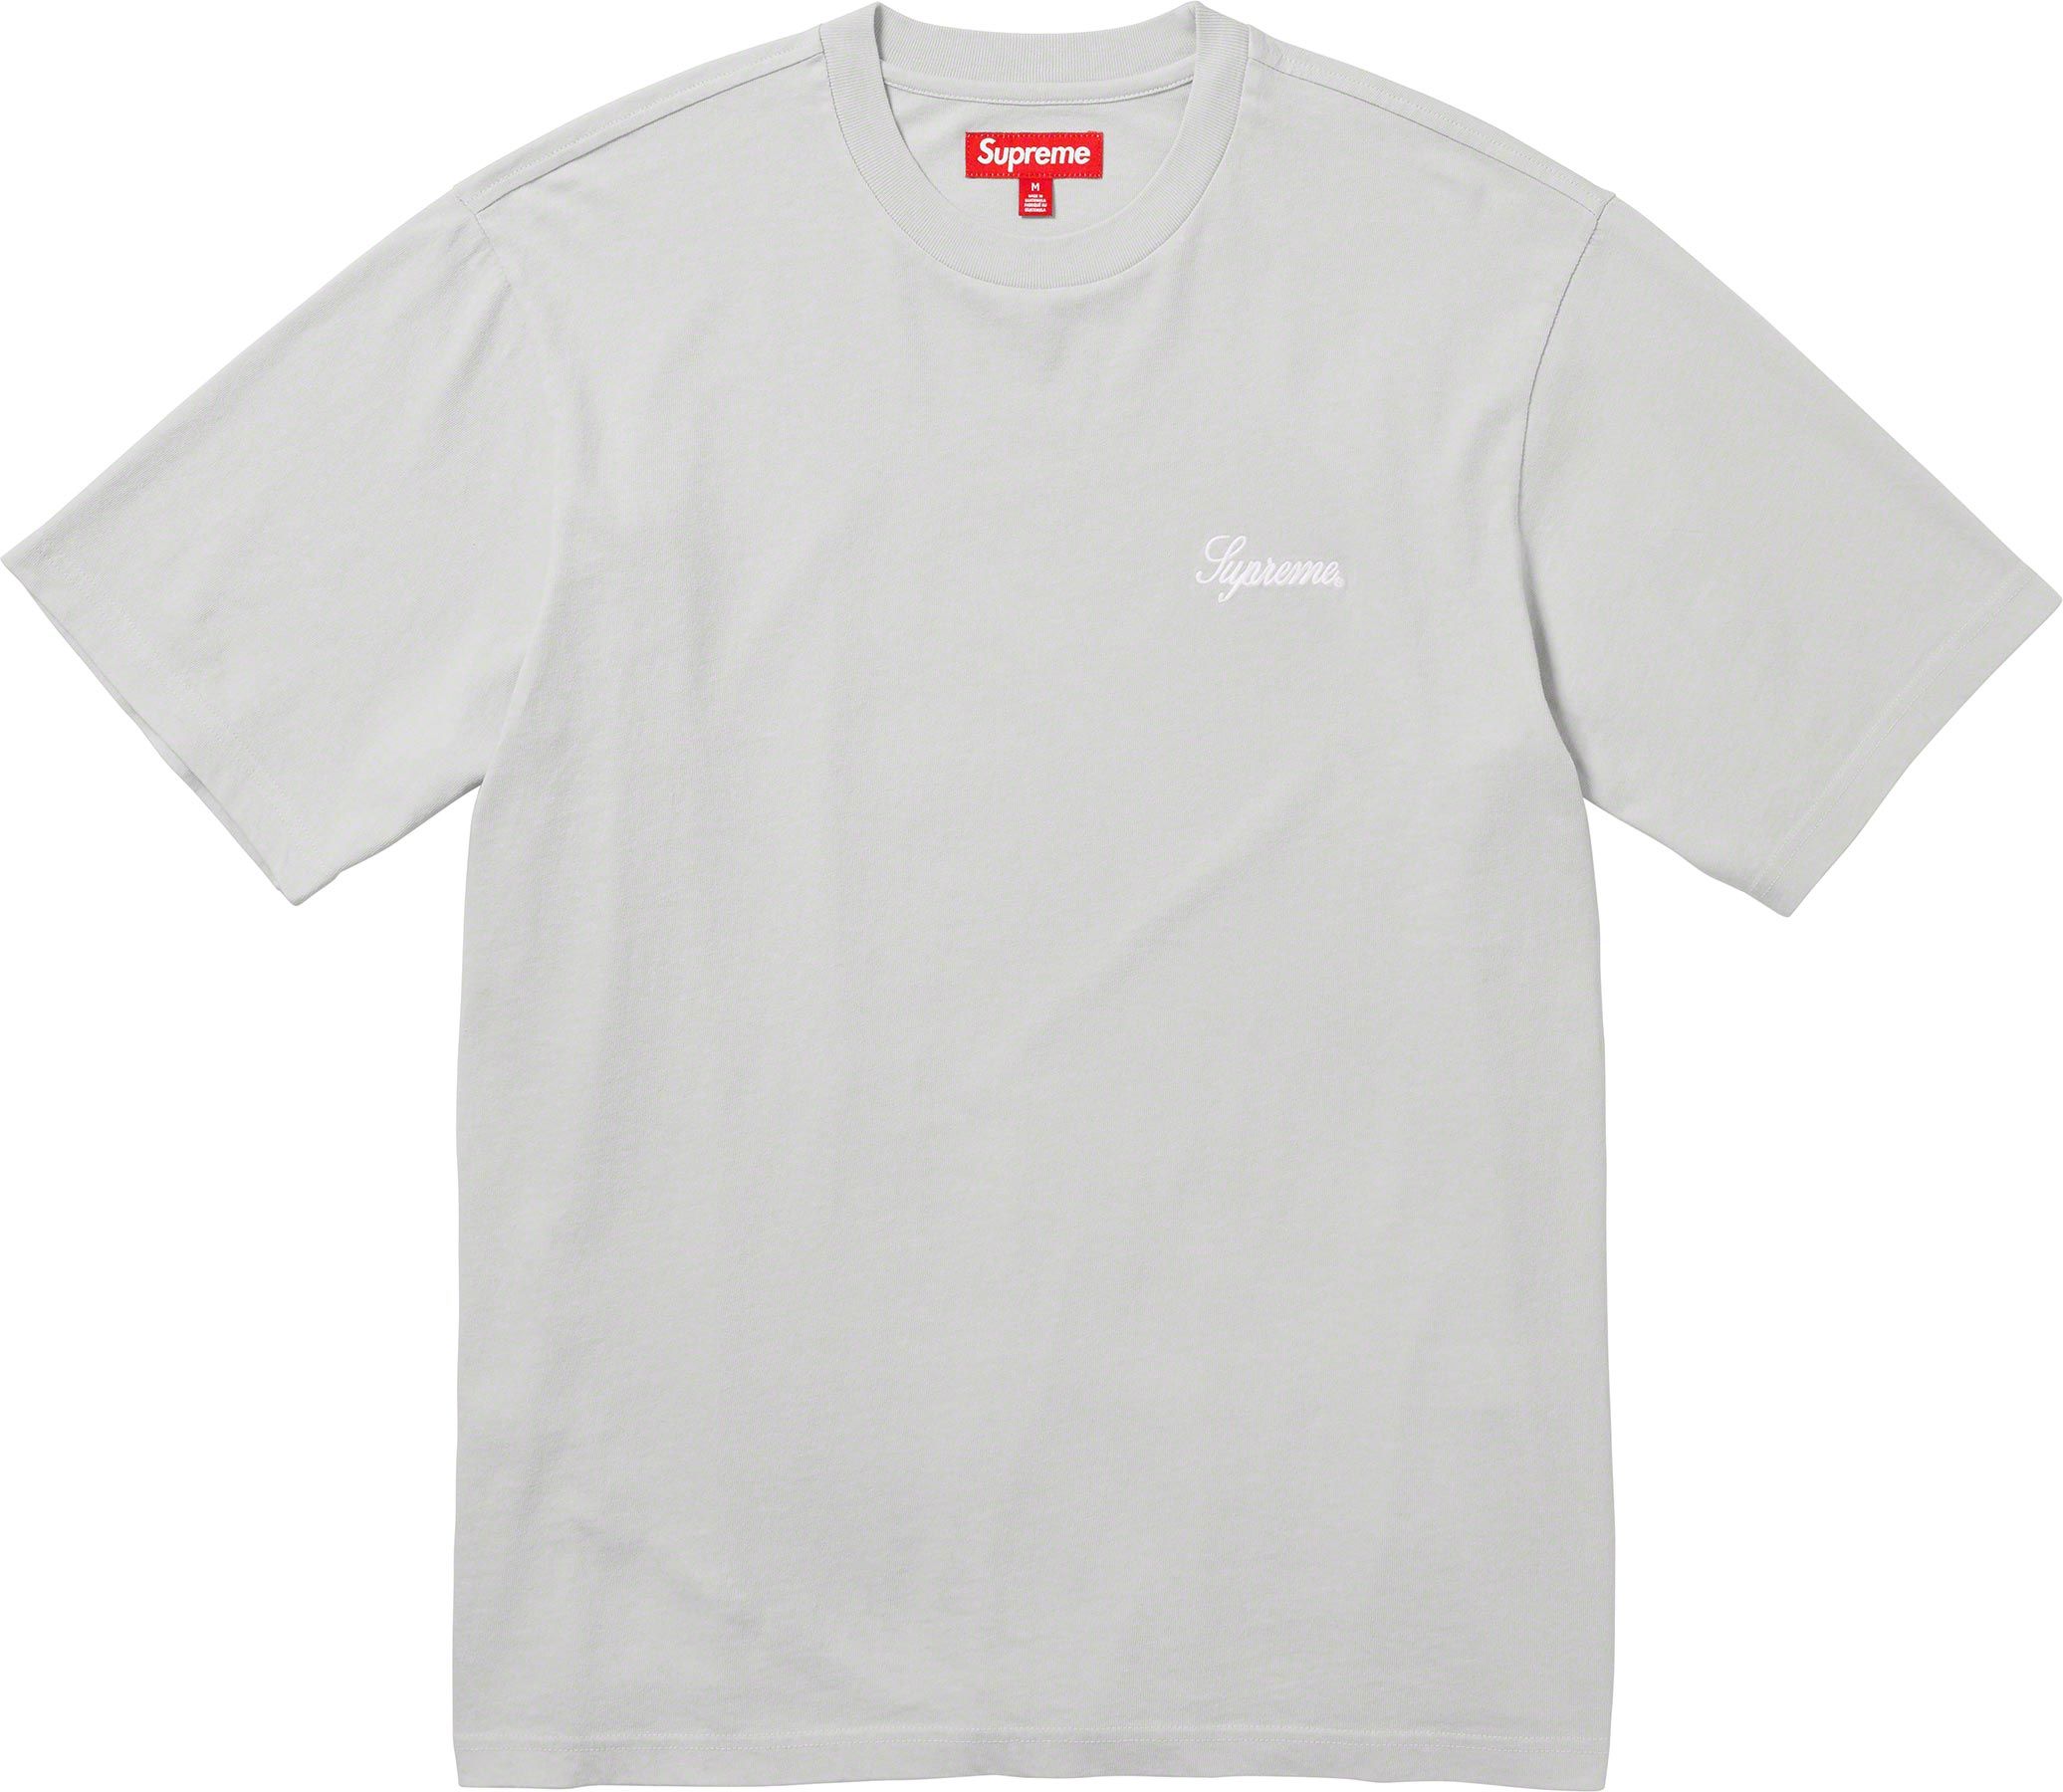 Washed Script S S Top - fall winter 2023 - Supreme